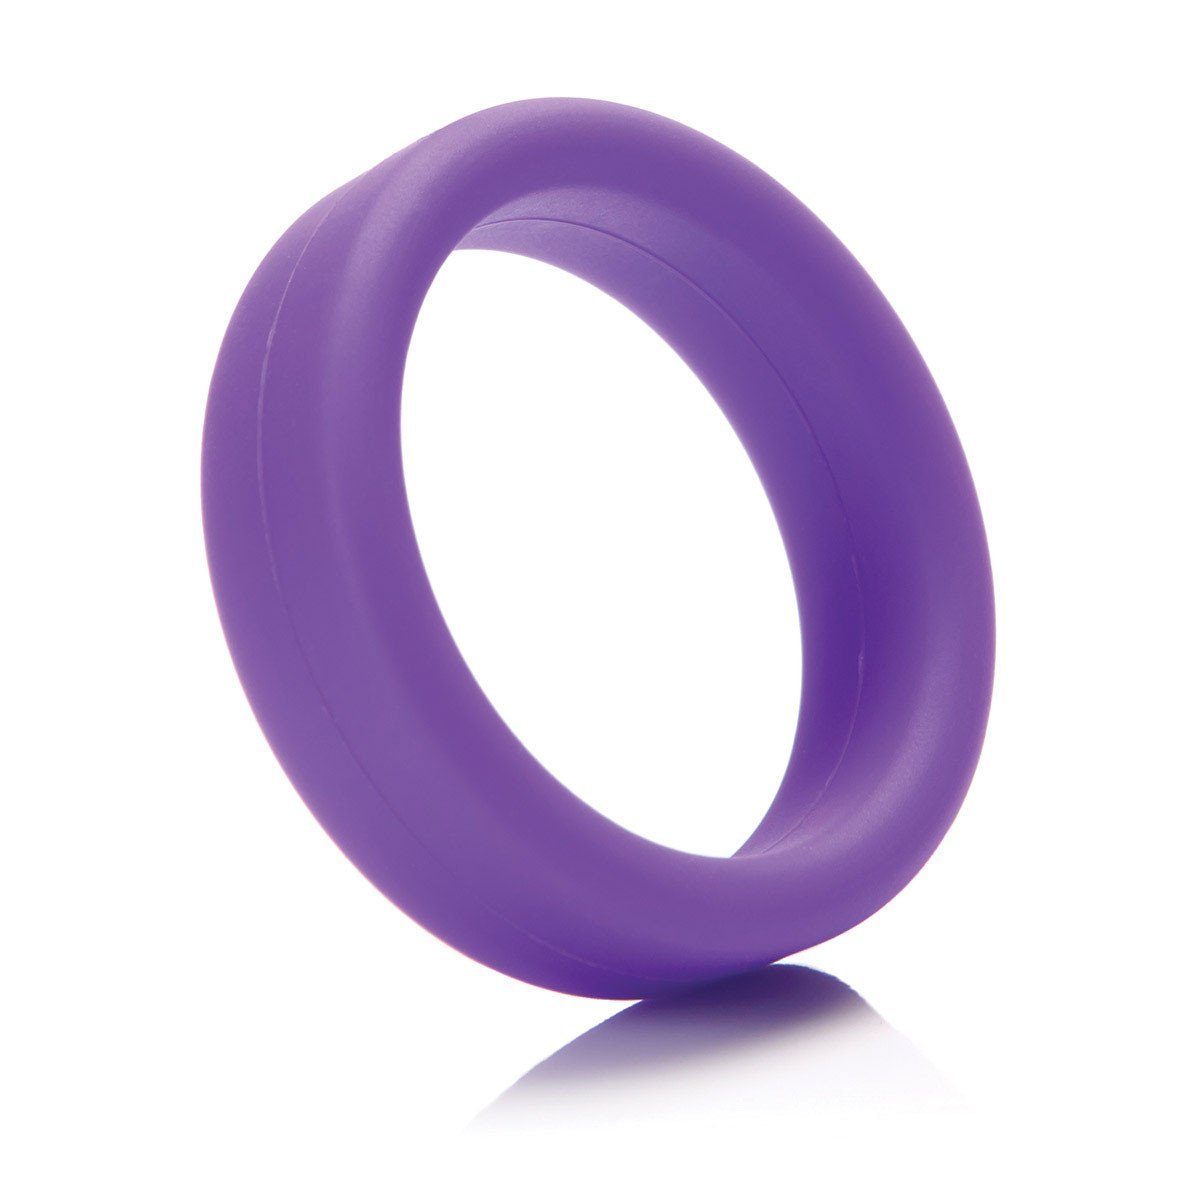 SuperSoft Silicone C-Ring free shipping - Beyond Delights